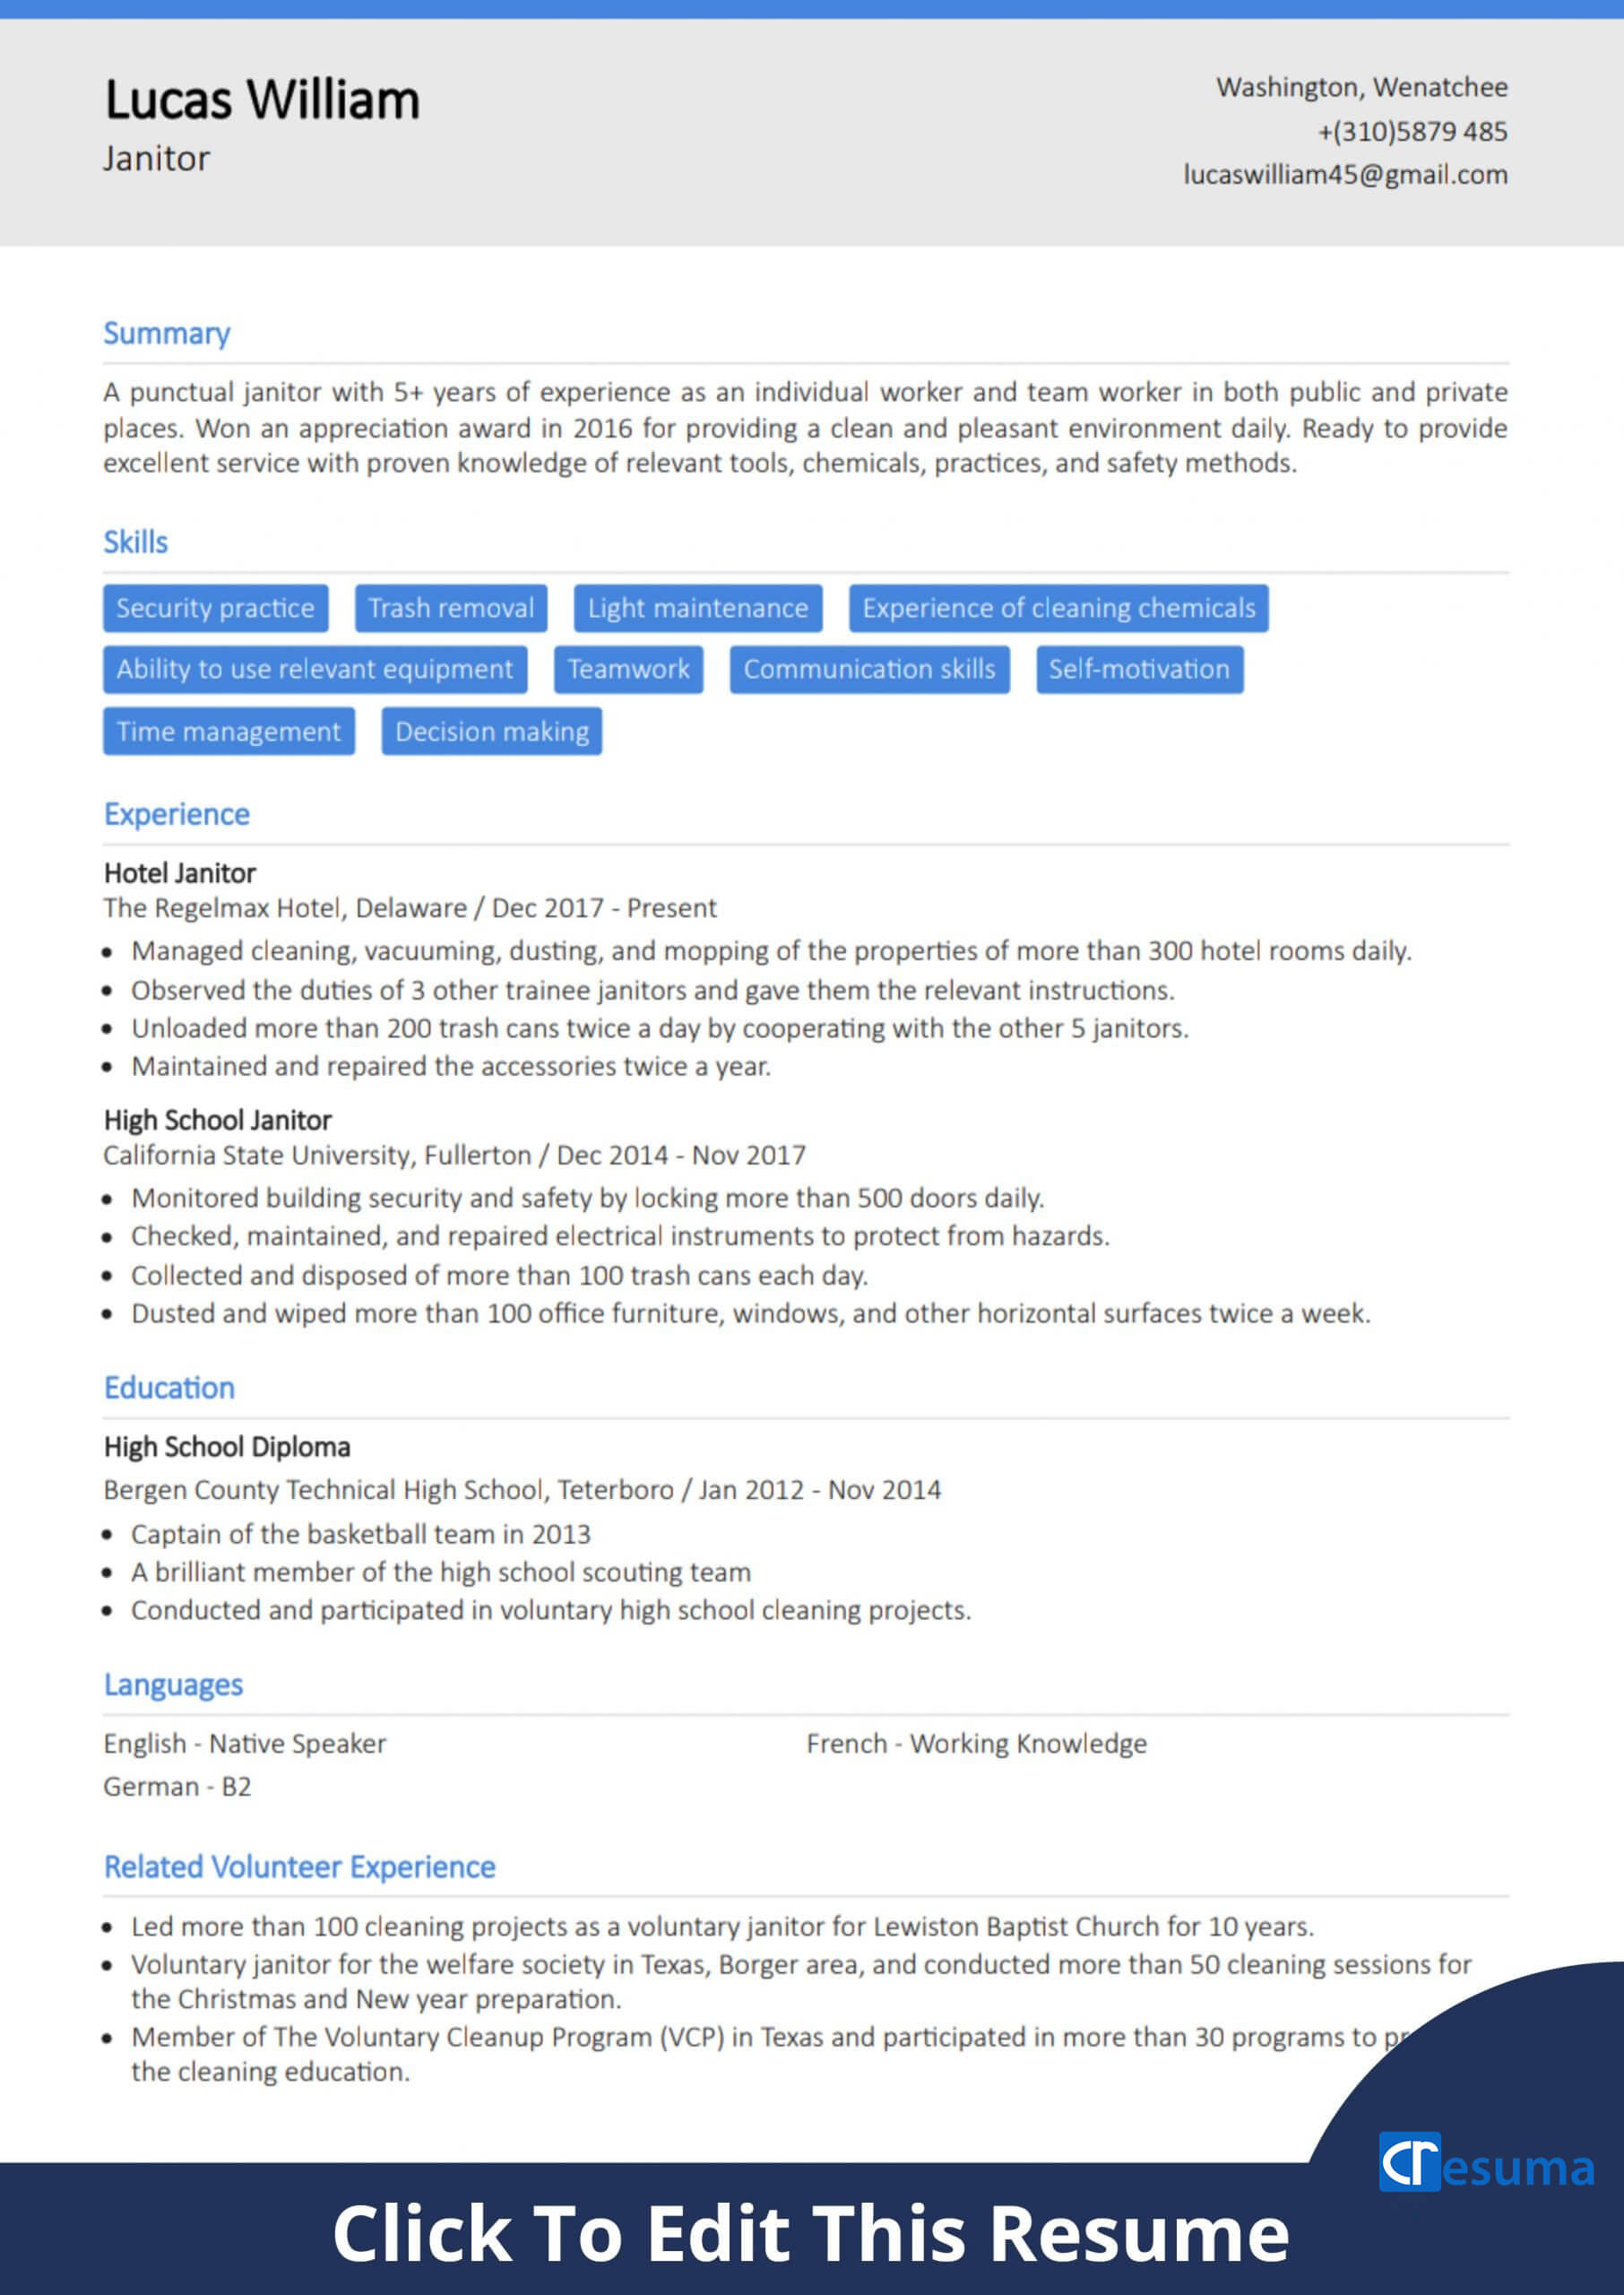 Sample Resume for Custodian with No Experience Janitor Resume Example [complete Writing Guide] Cresuma